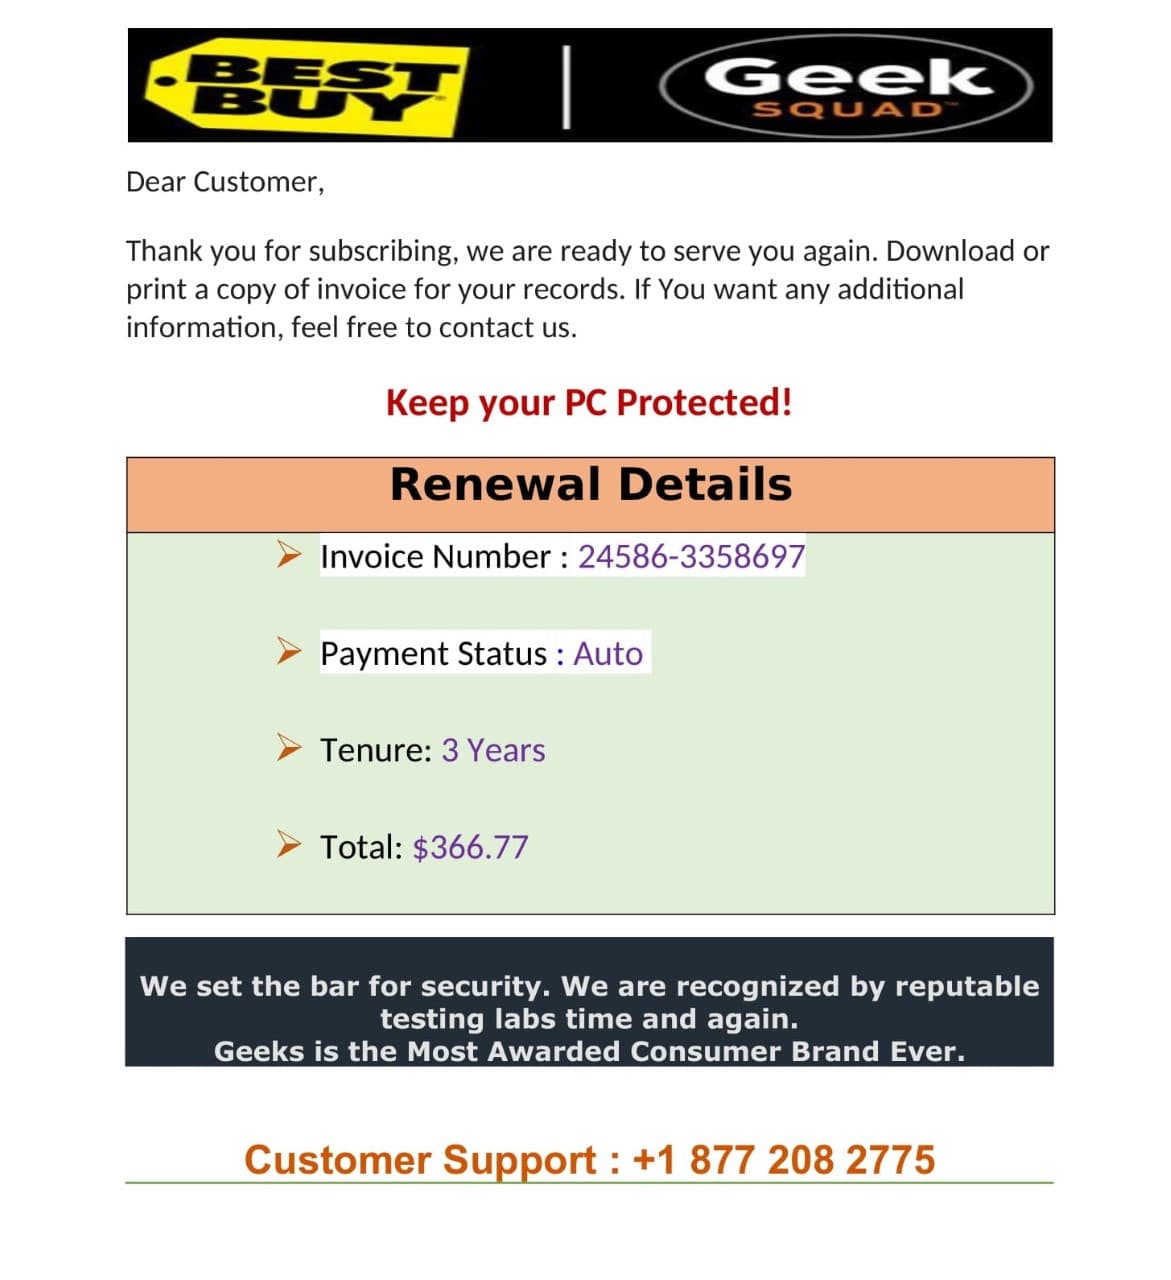 geek-squad-invoice-456098762-with-email-image-refund-scams